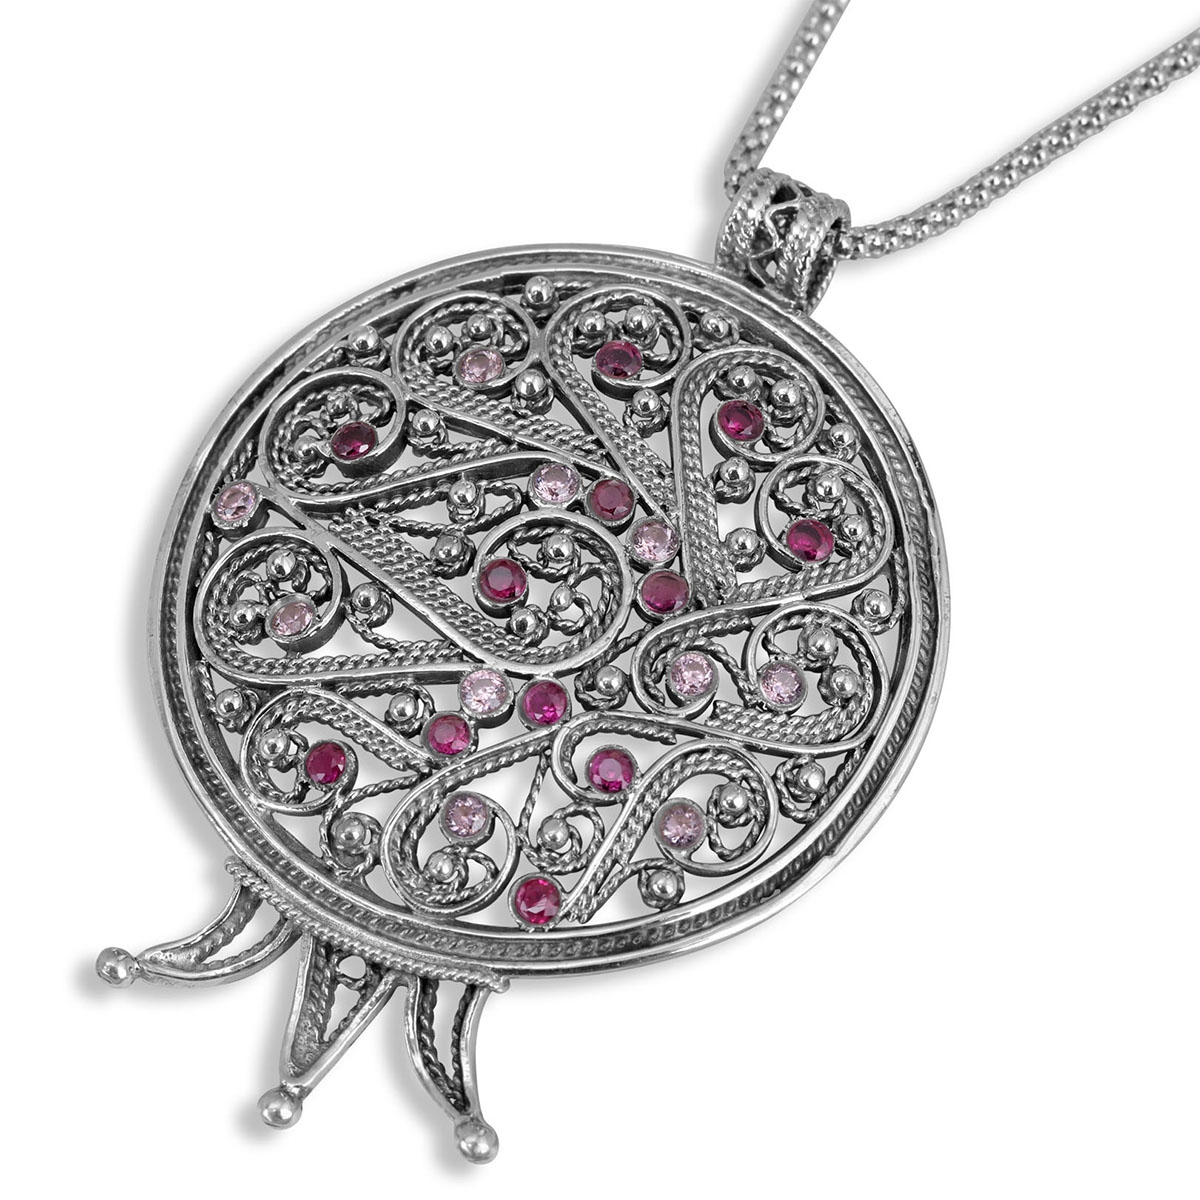 Rafael Jewelry Filigree Pomegranate with Gemstones and 925 Sterling Silver Necklace - 1